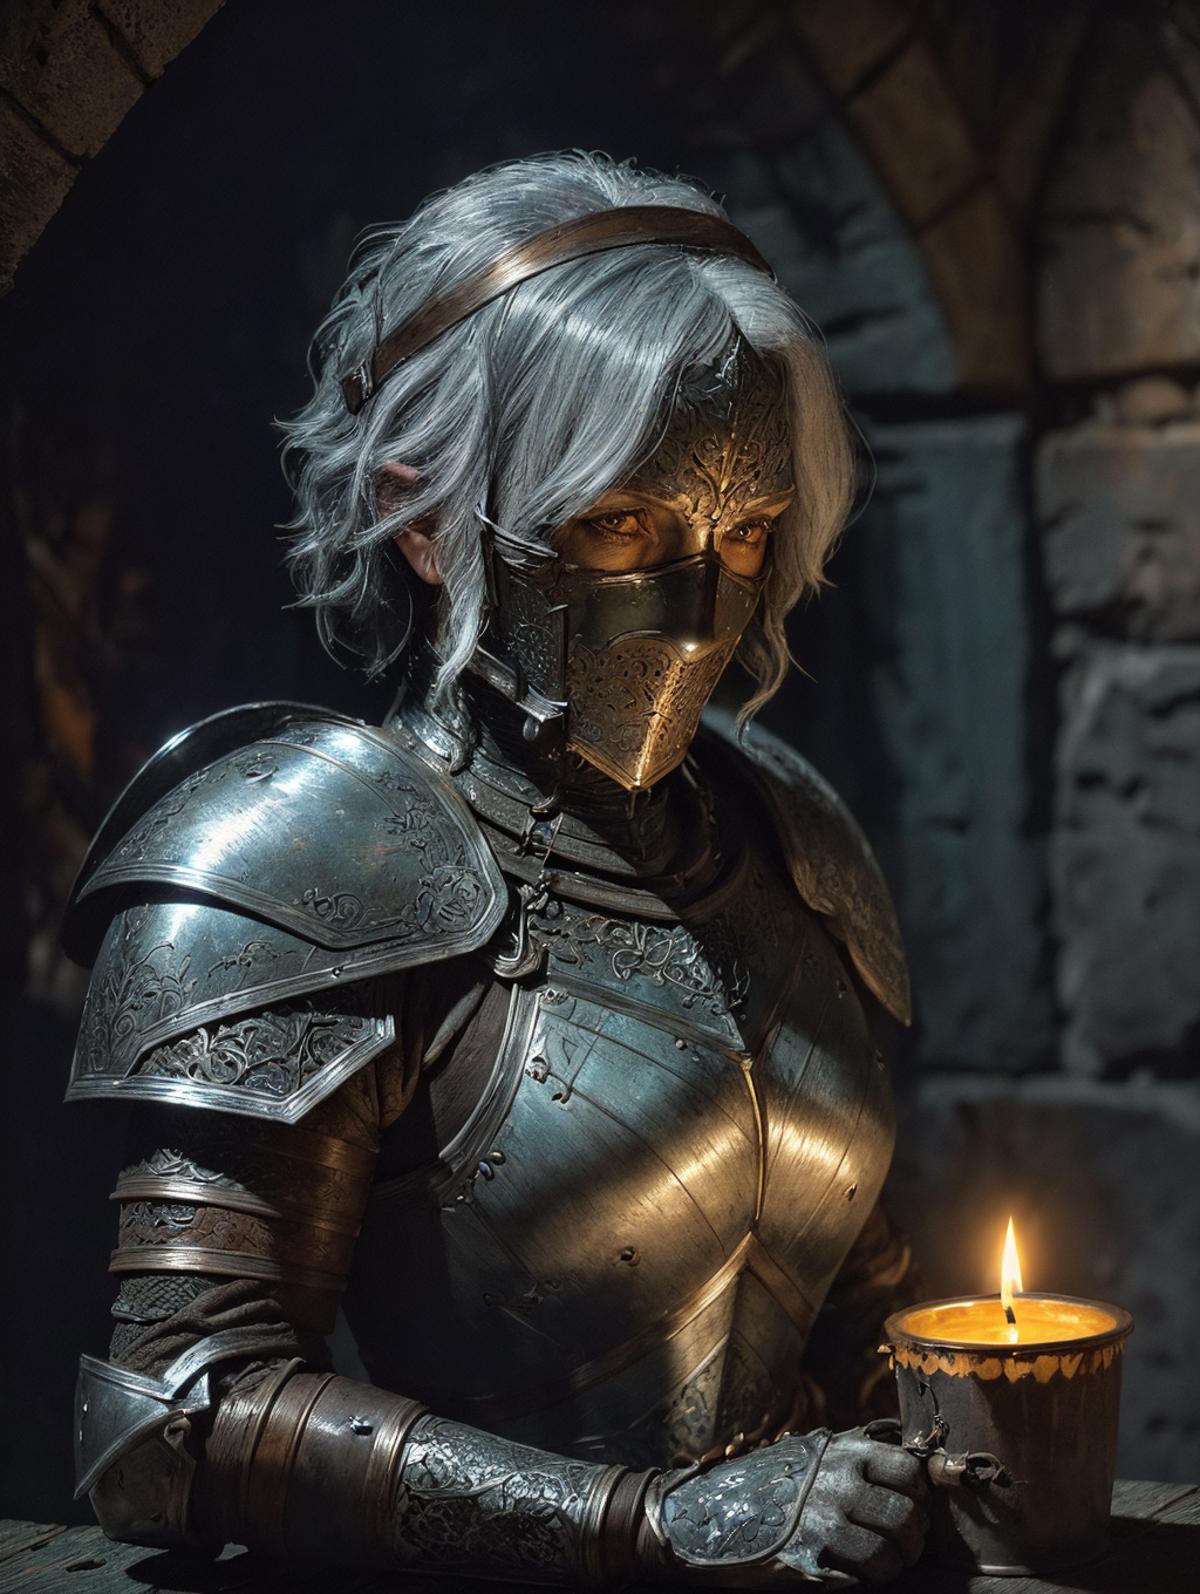 A female warrior in a medieval-style suit of armor holding a candle.